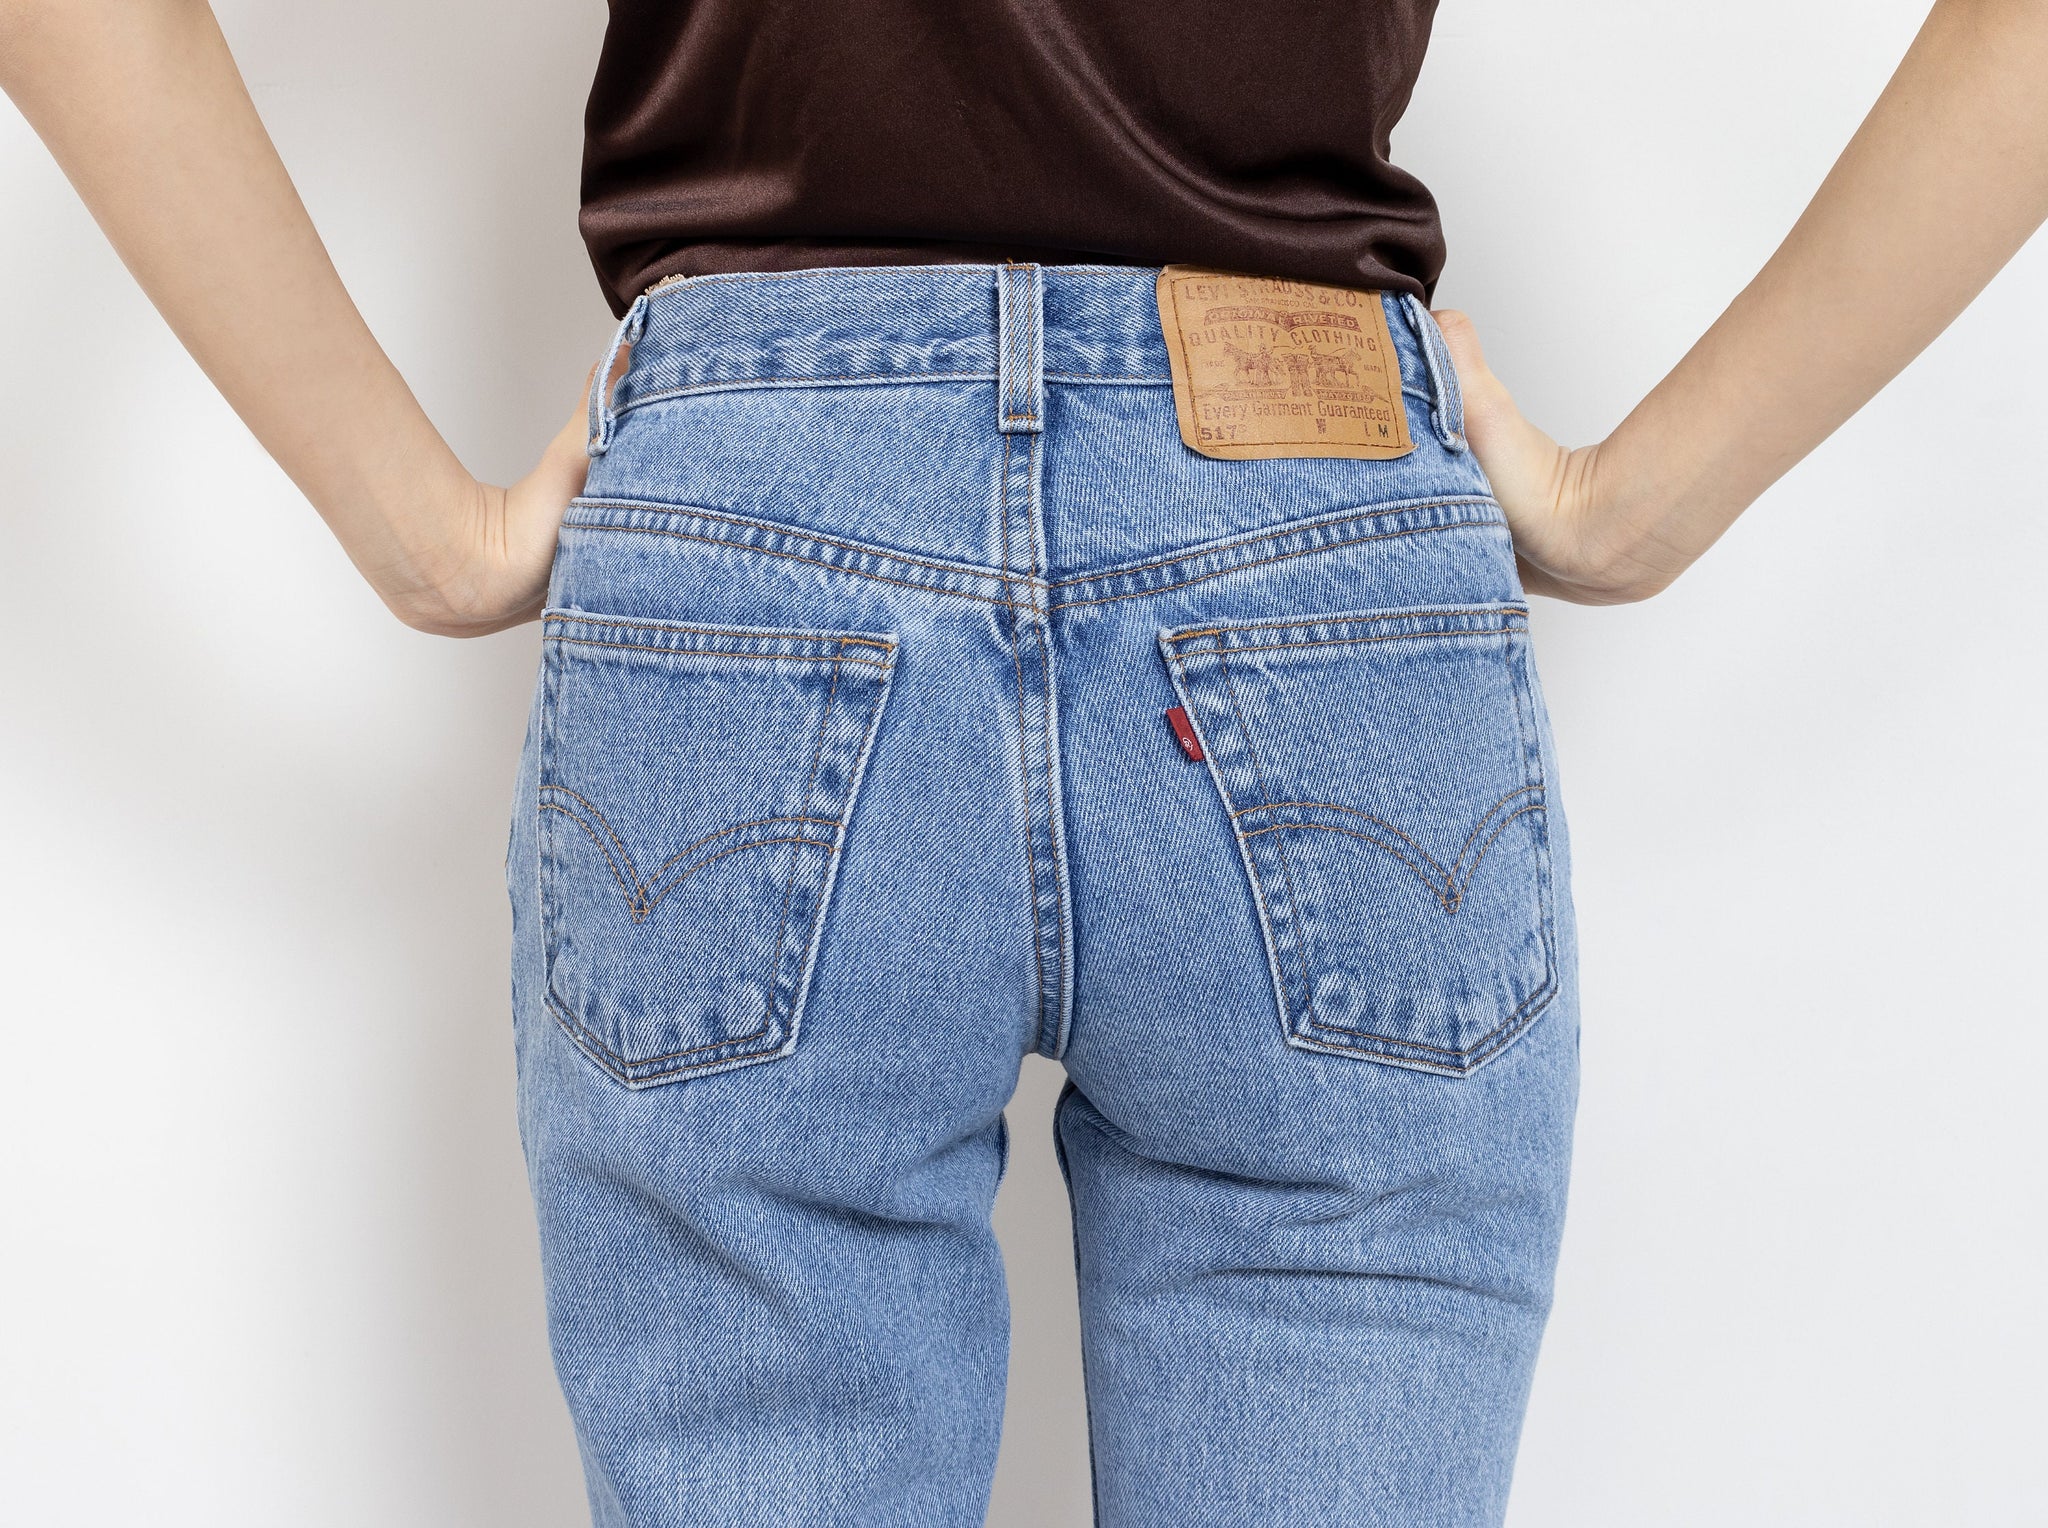 Vintage Levi's 517 Jeans For Women – Better Stay Together